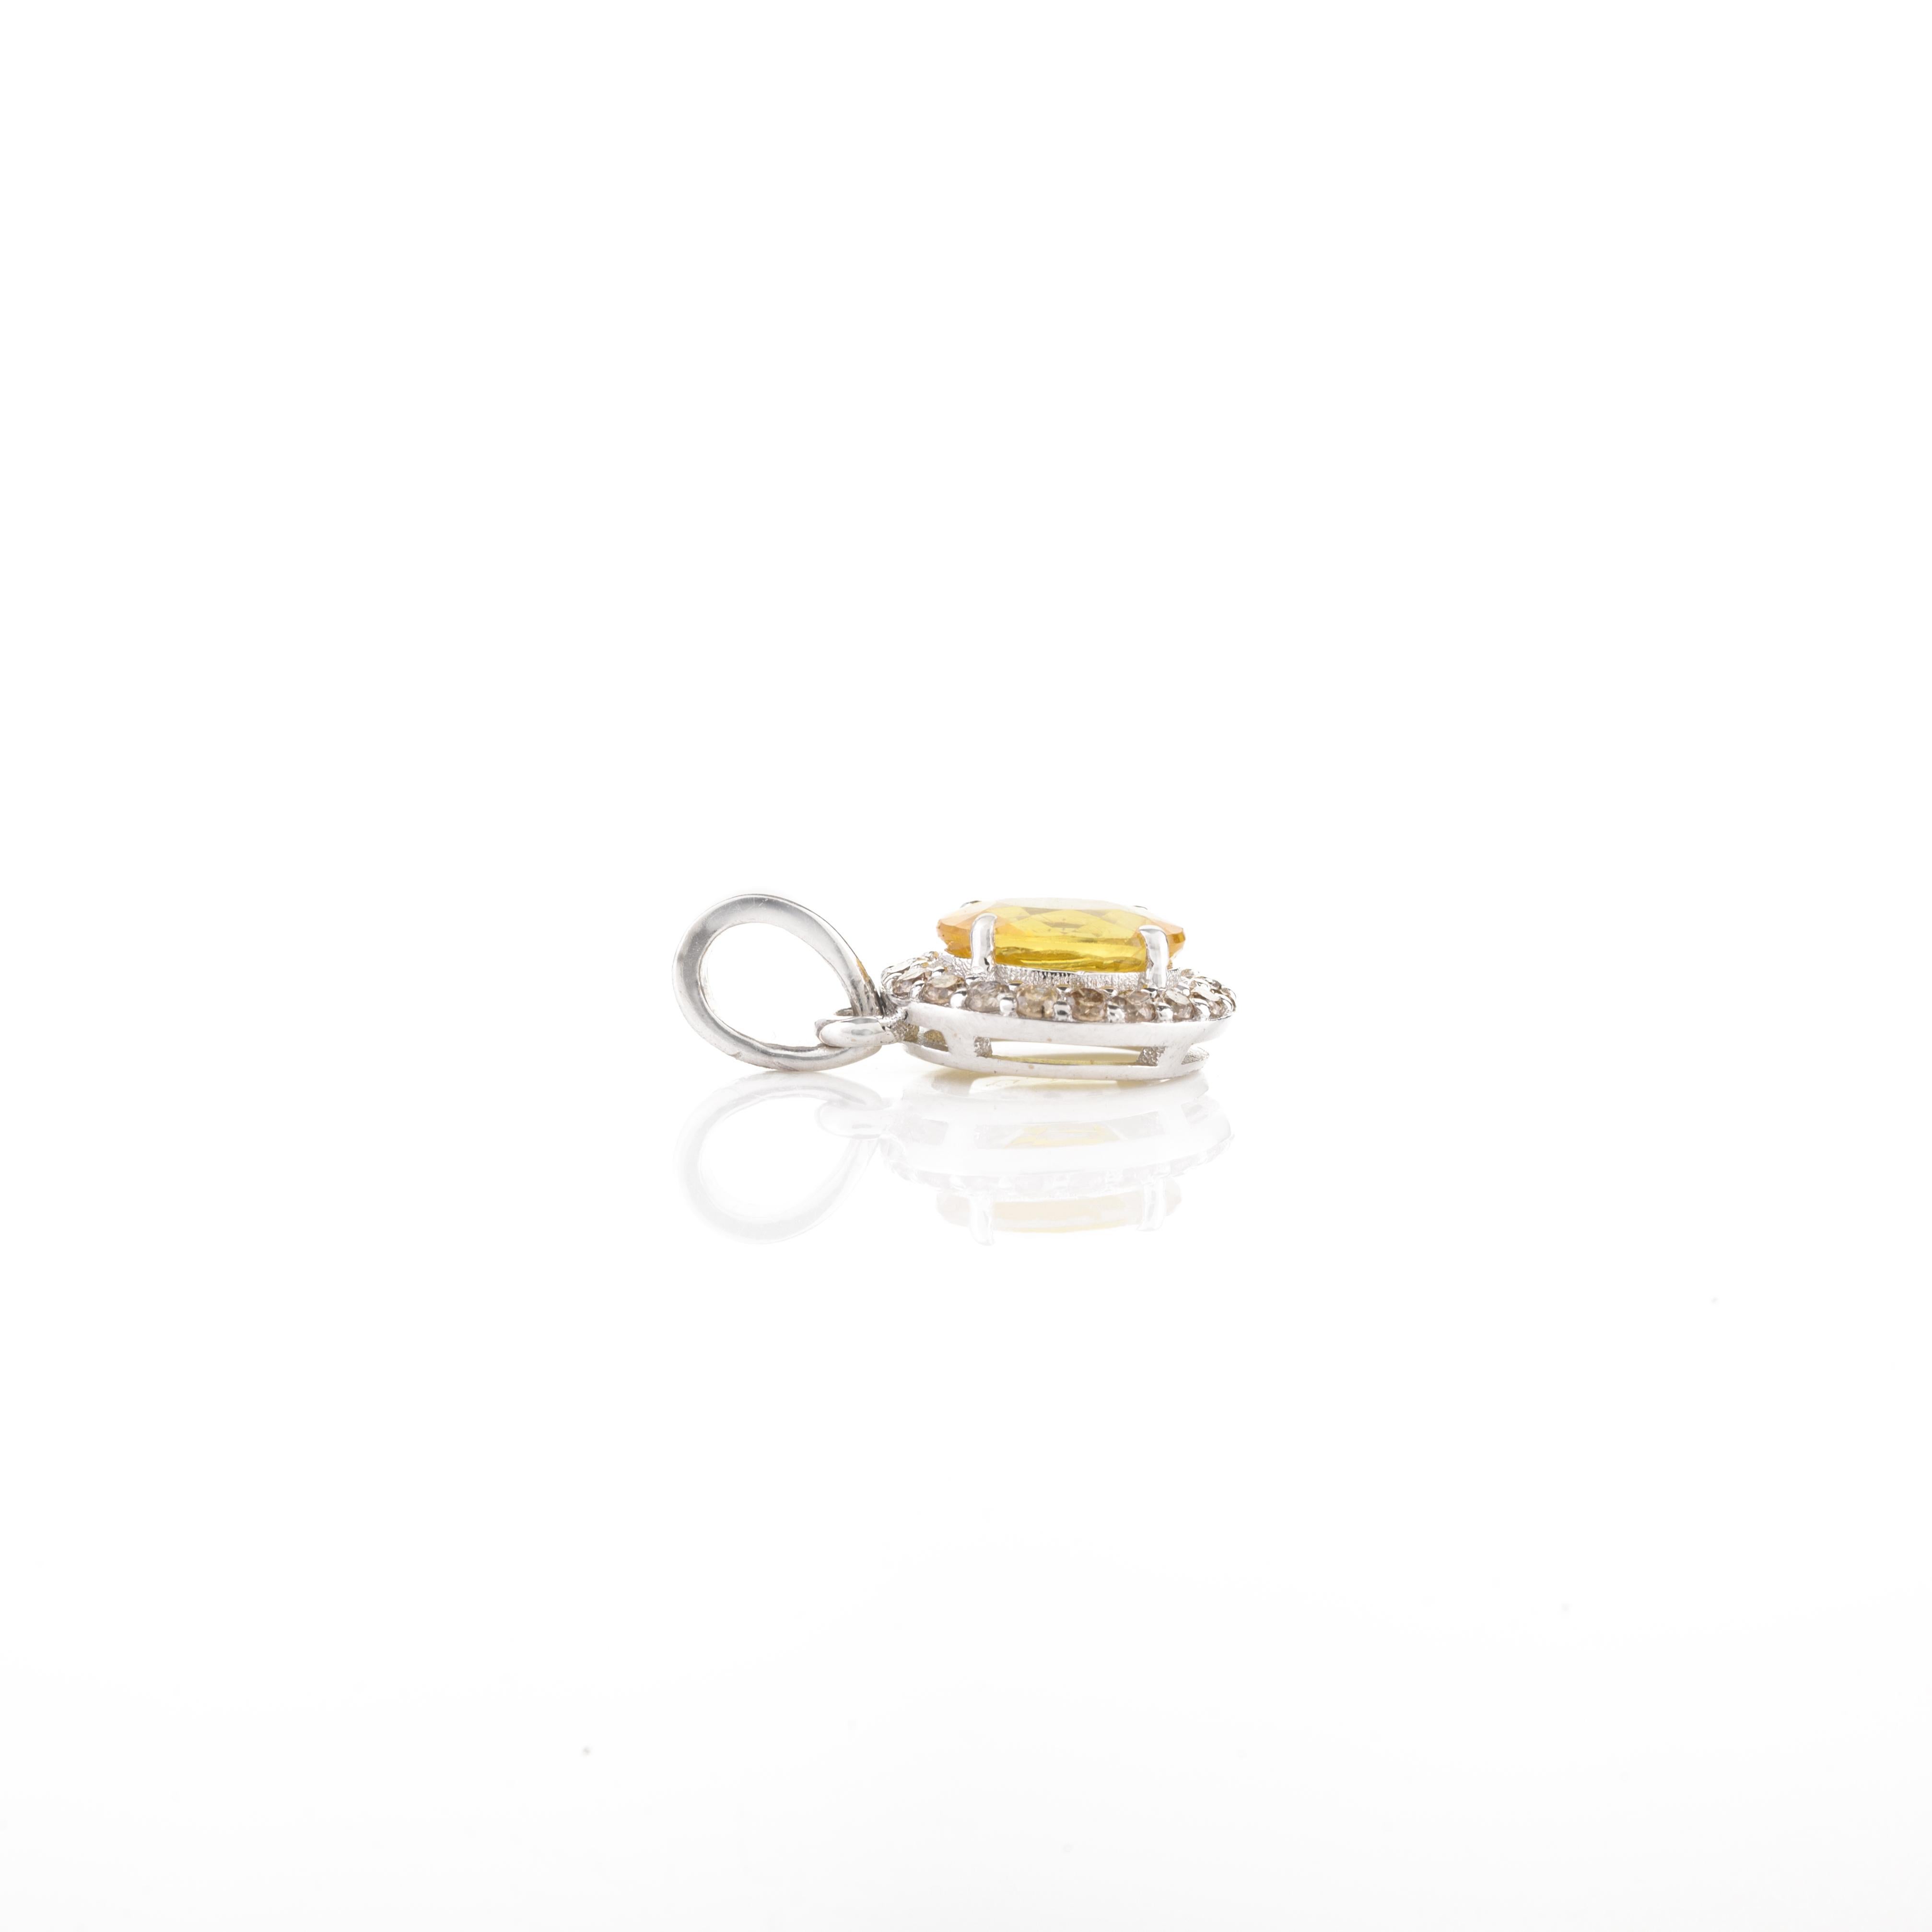 For Sale:  18k White Gold Yellow Sapphire Halo Diamond Ring and Pendant Jewelry Set for Her 9